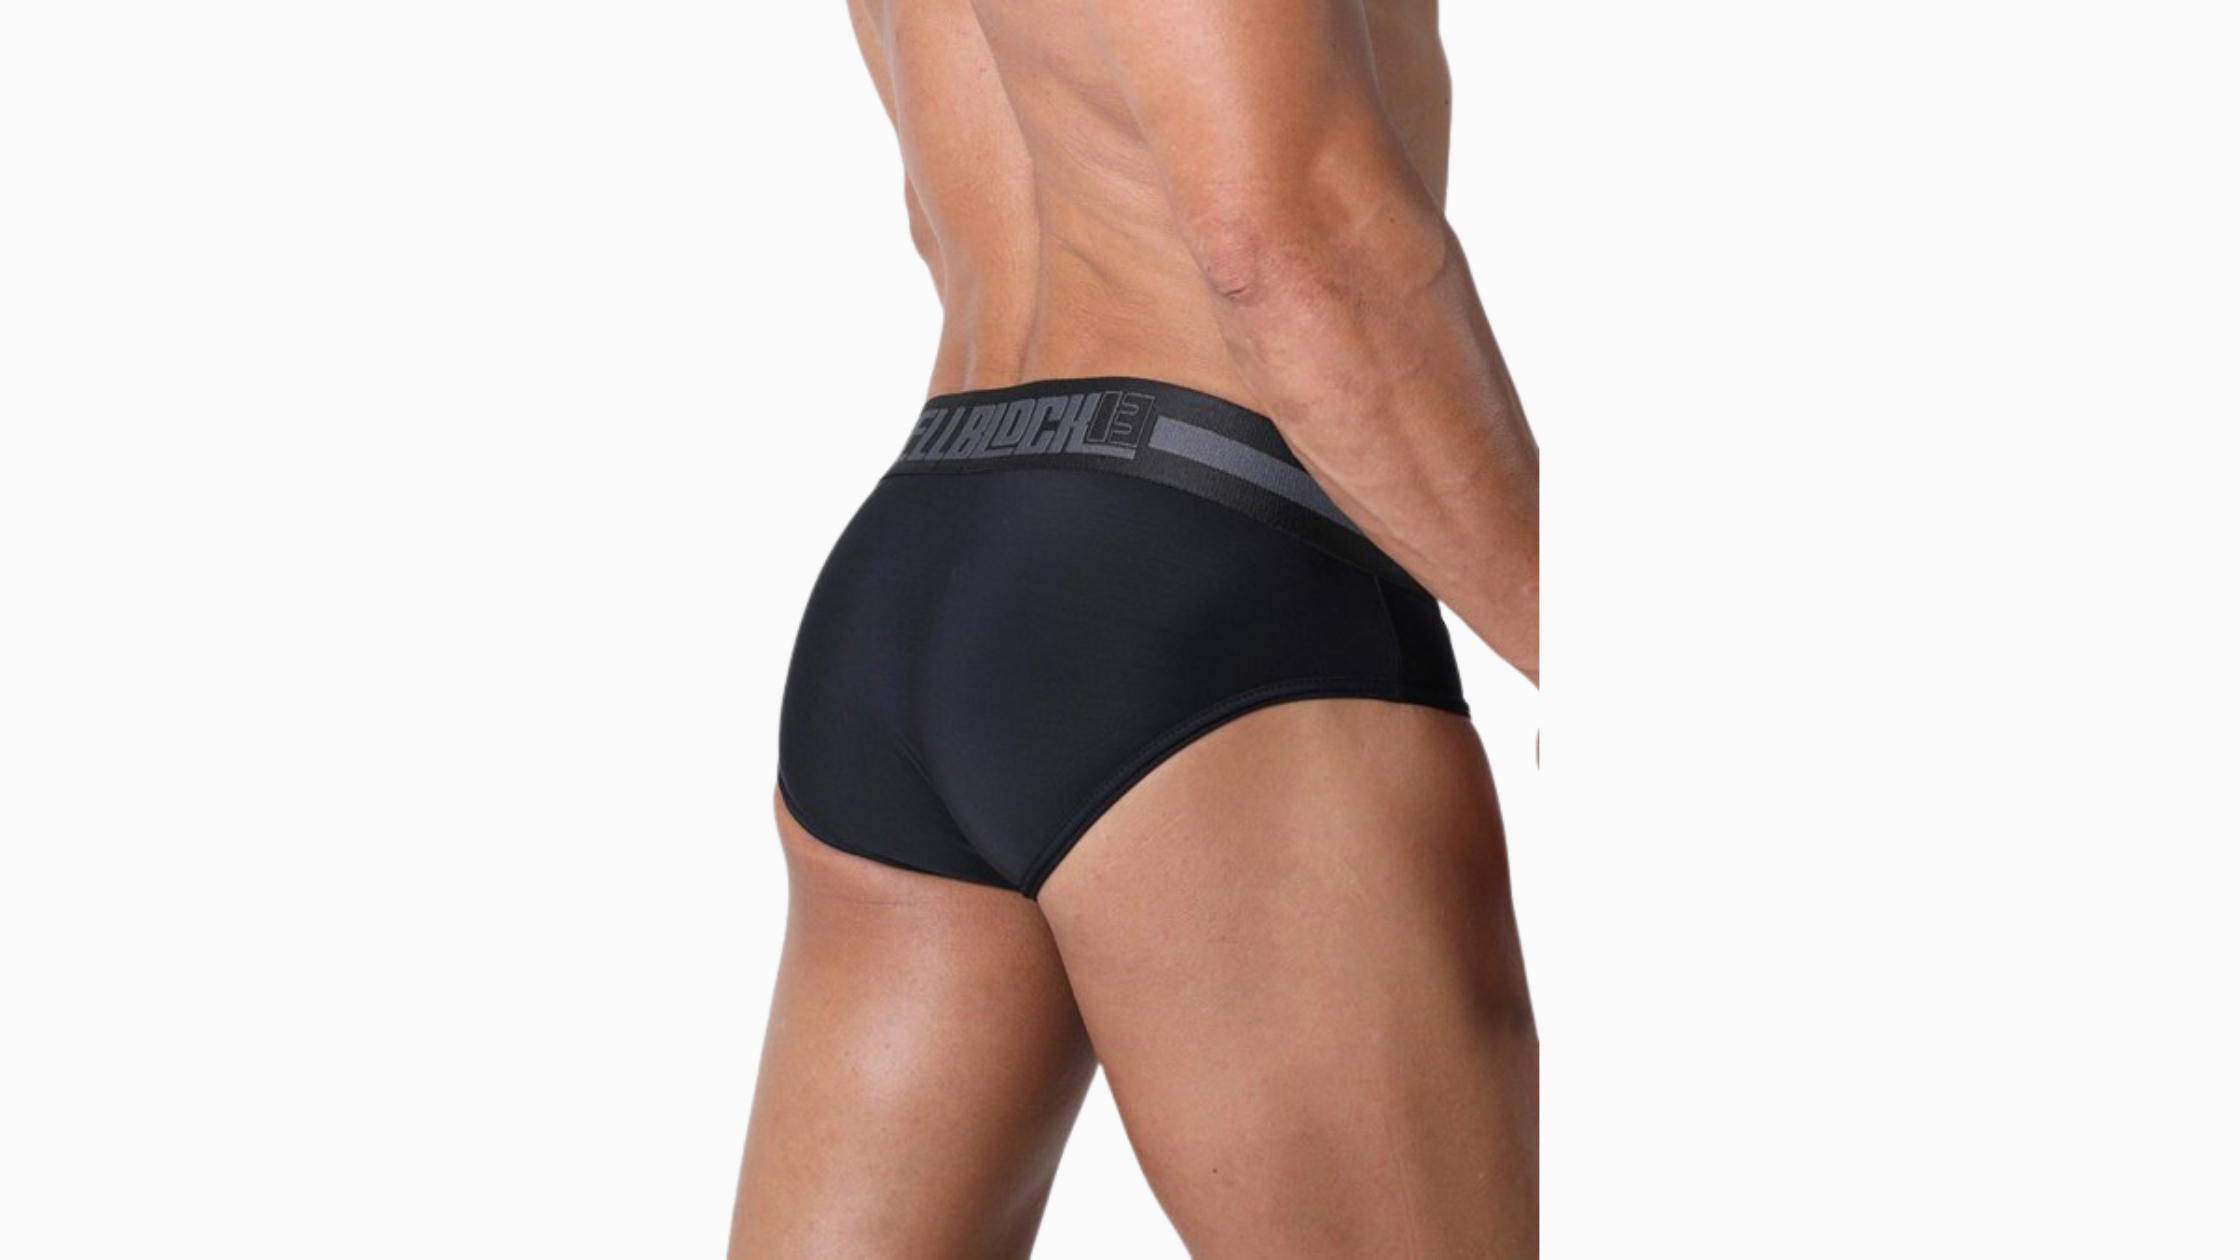 Men's Underwear Styles & You: What Your Undies Say About Your Personality